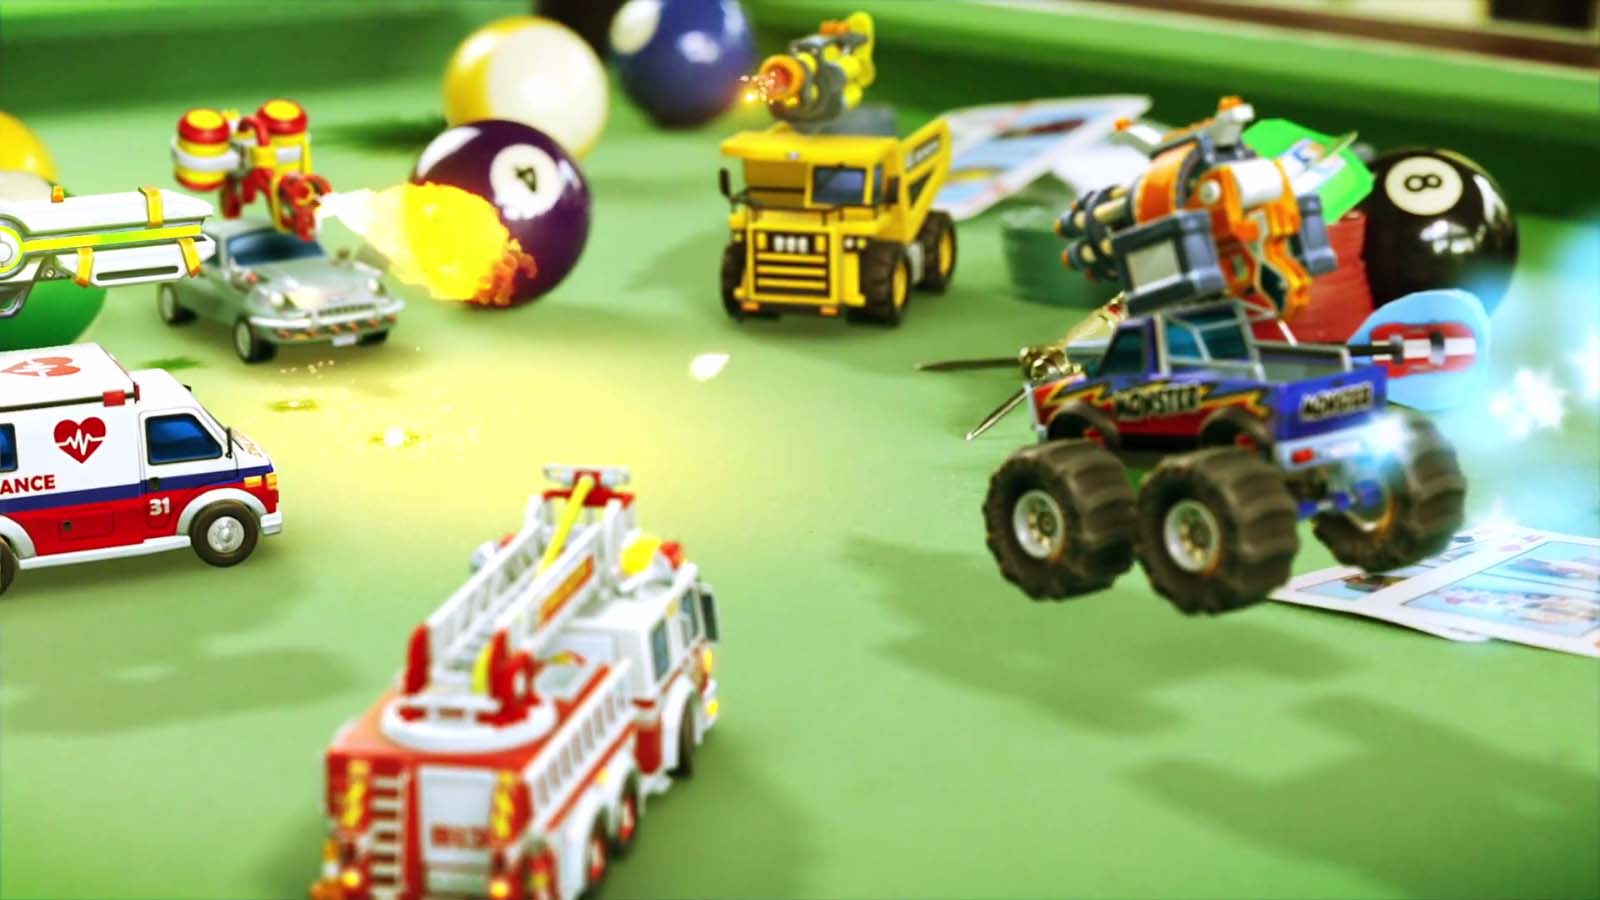 Micro Machines Wallpapers